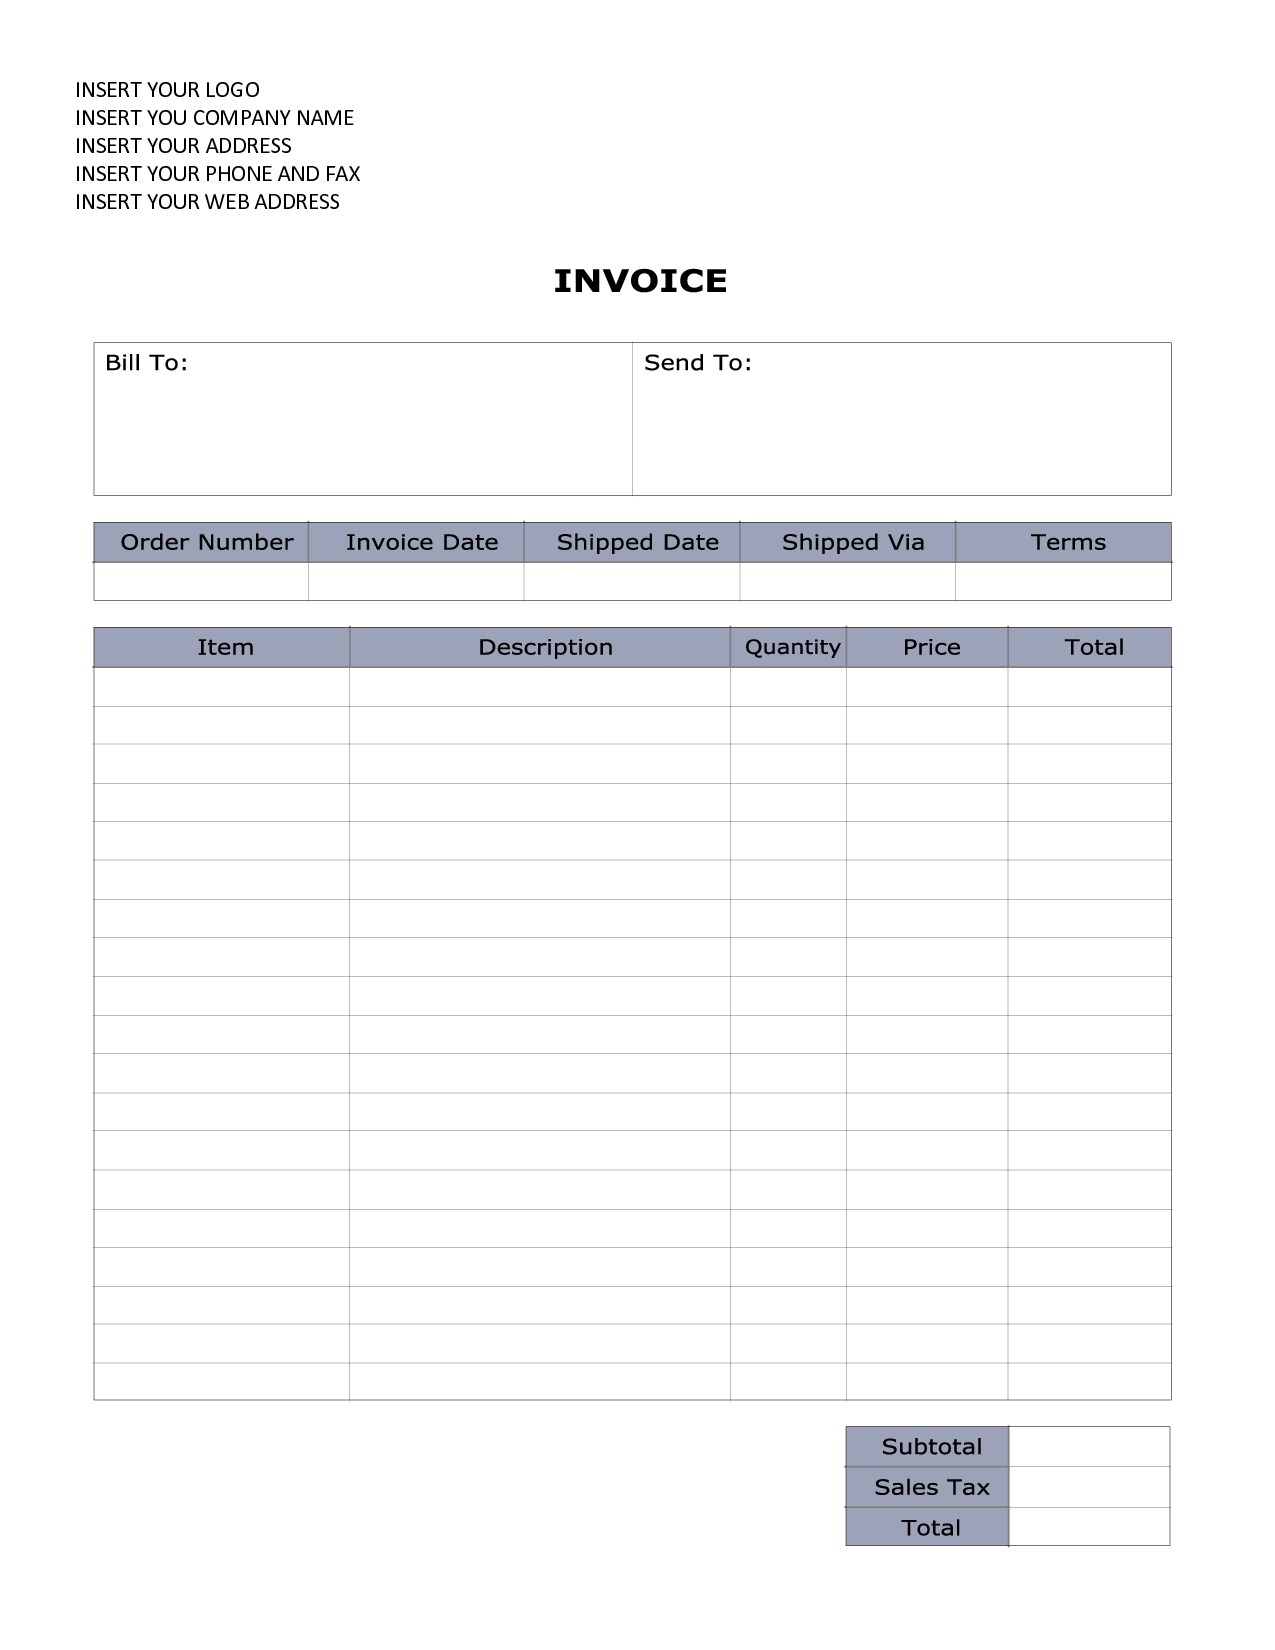 Where can you get printable invoice templates?